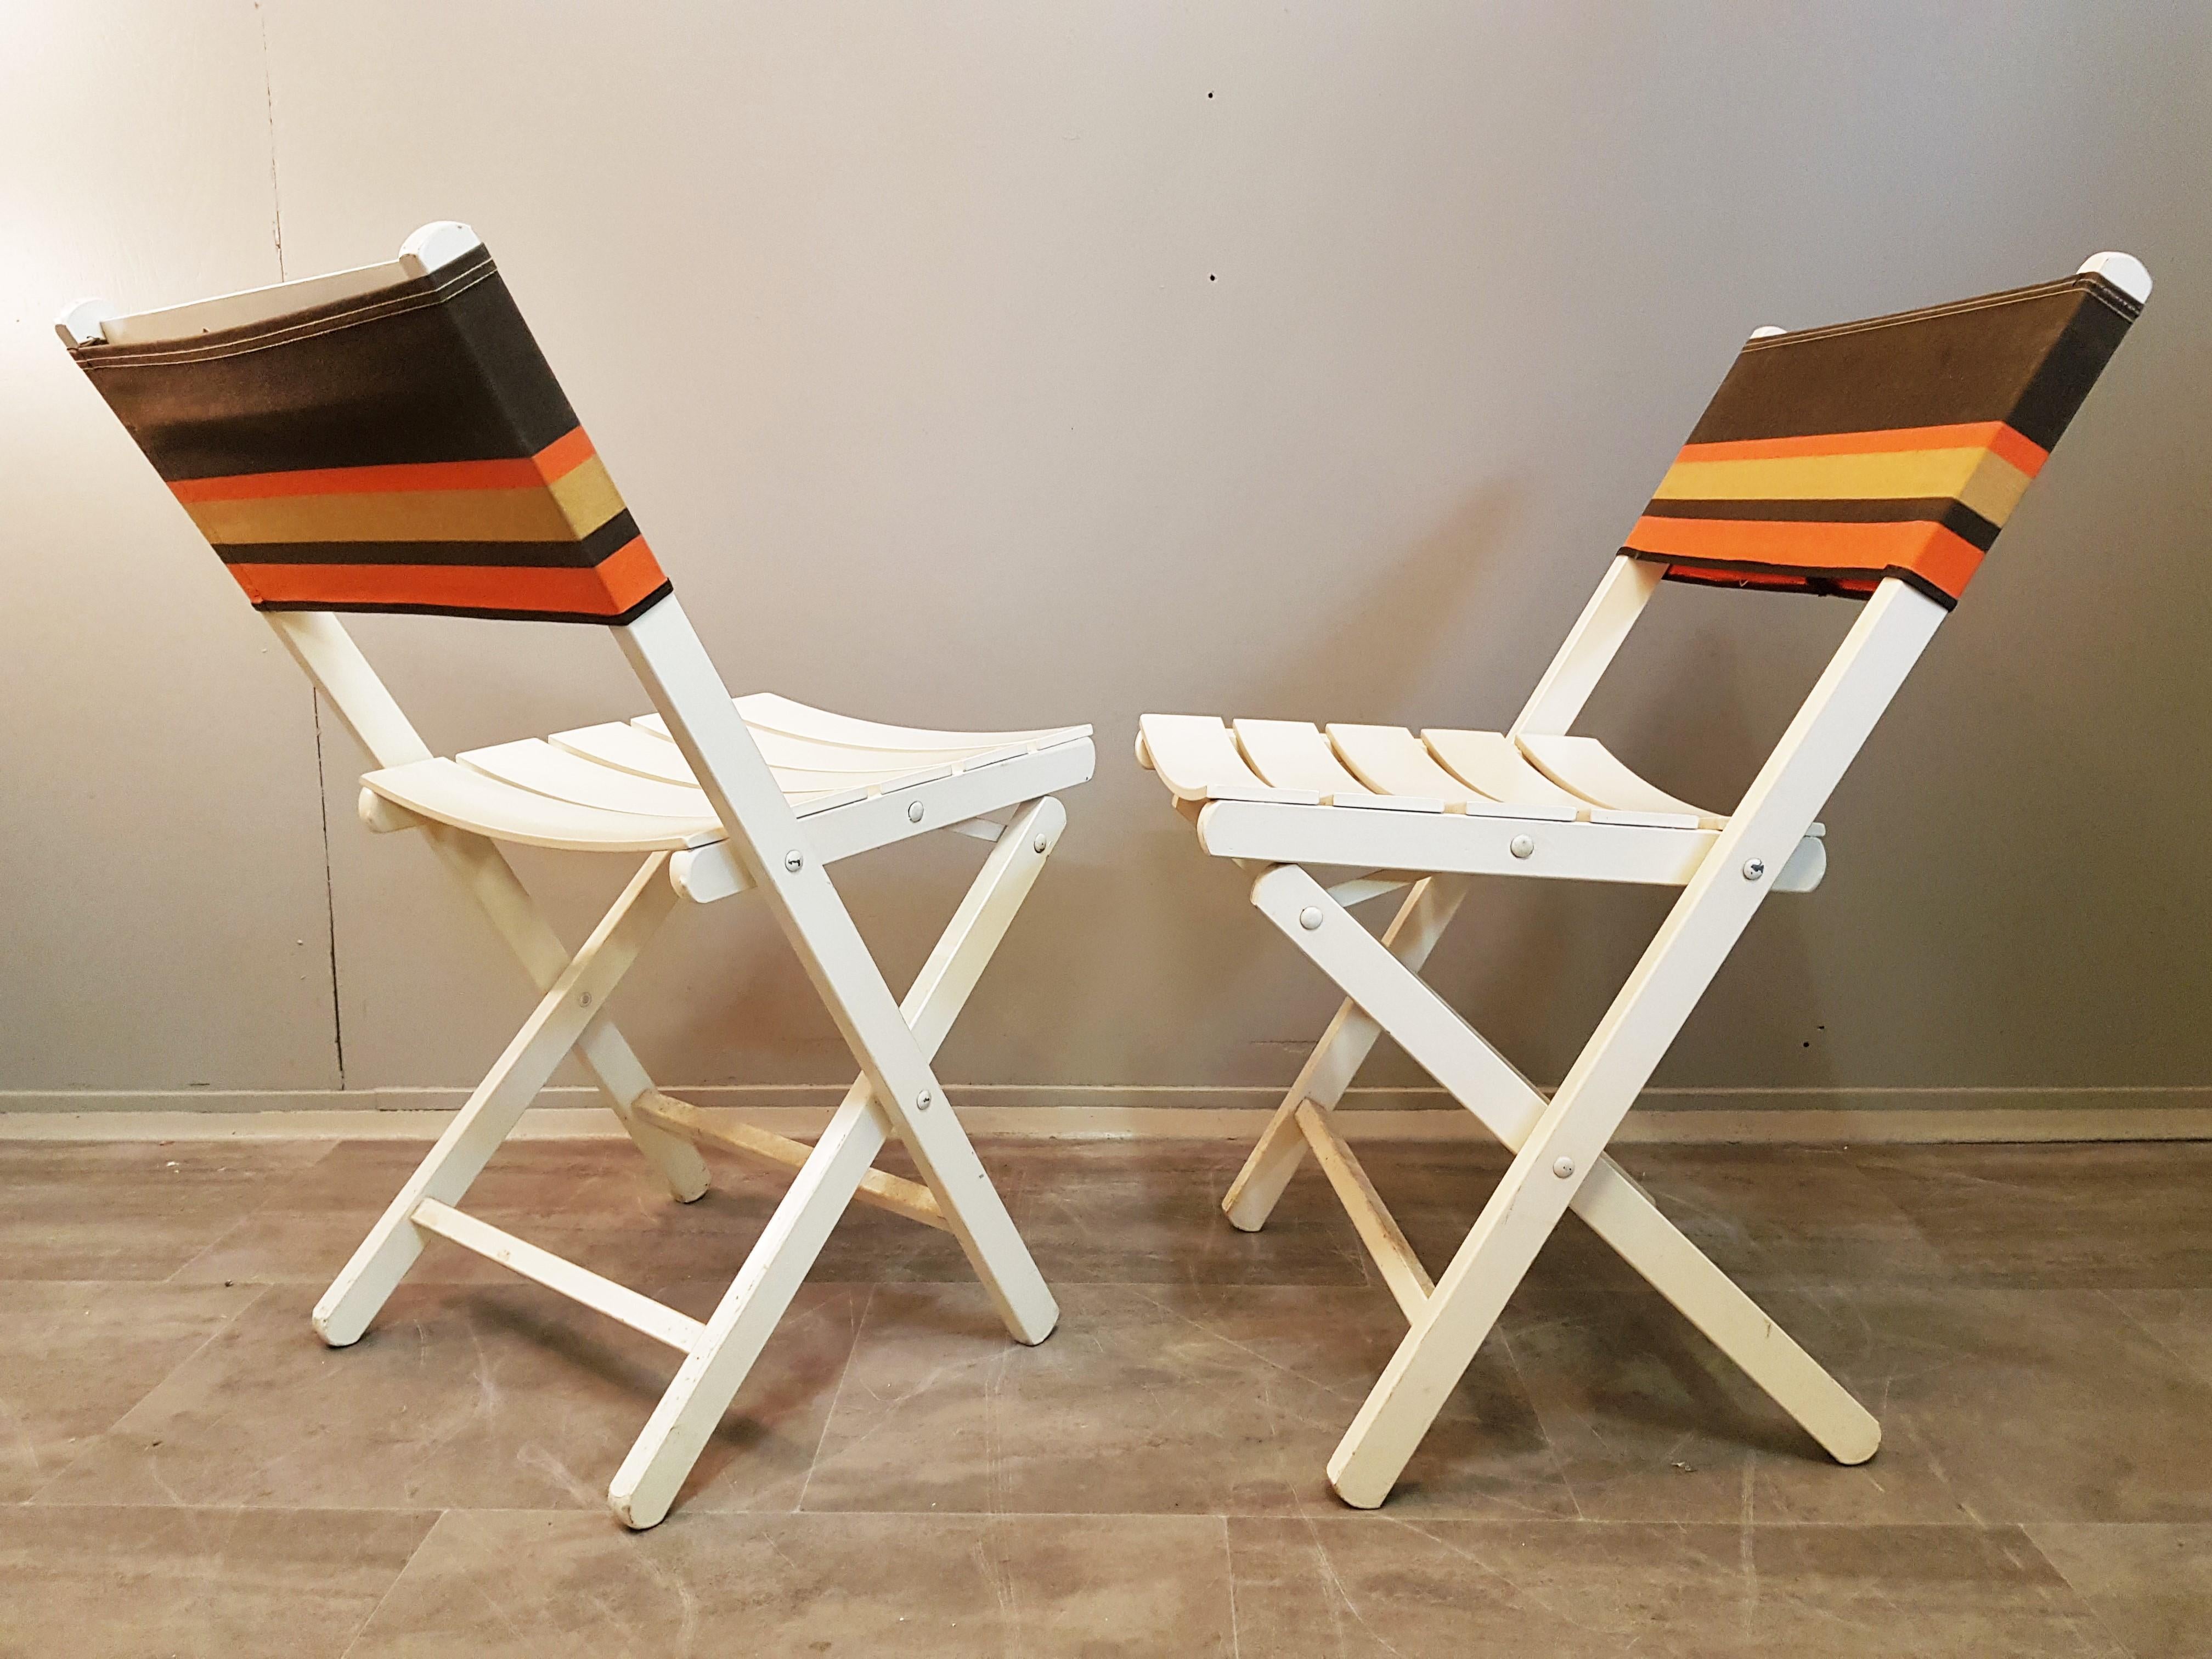 Boho Chic Set of 6 Midcentury Folding Chairs, France, 1960s For Sale 9